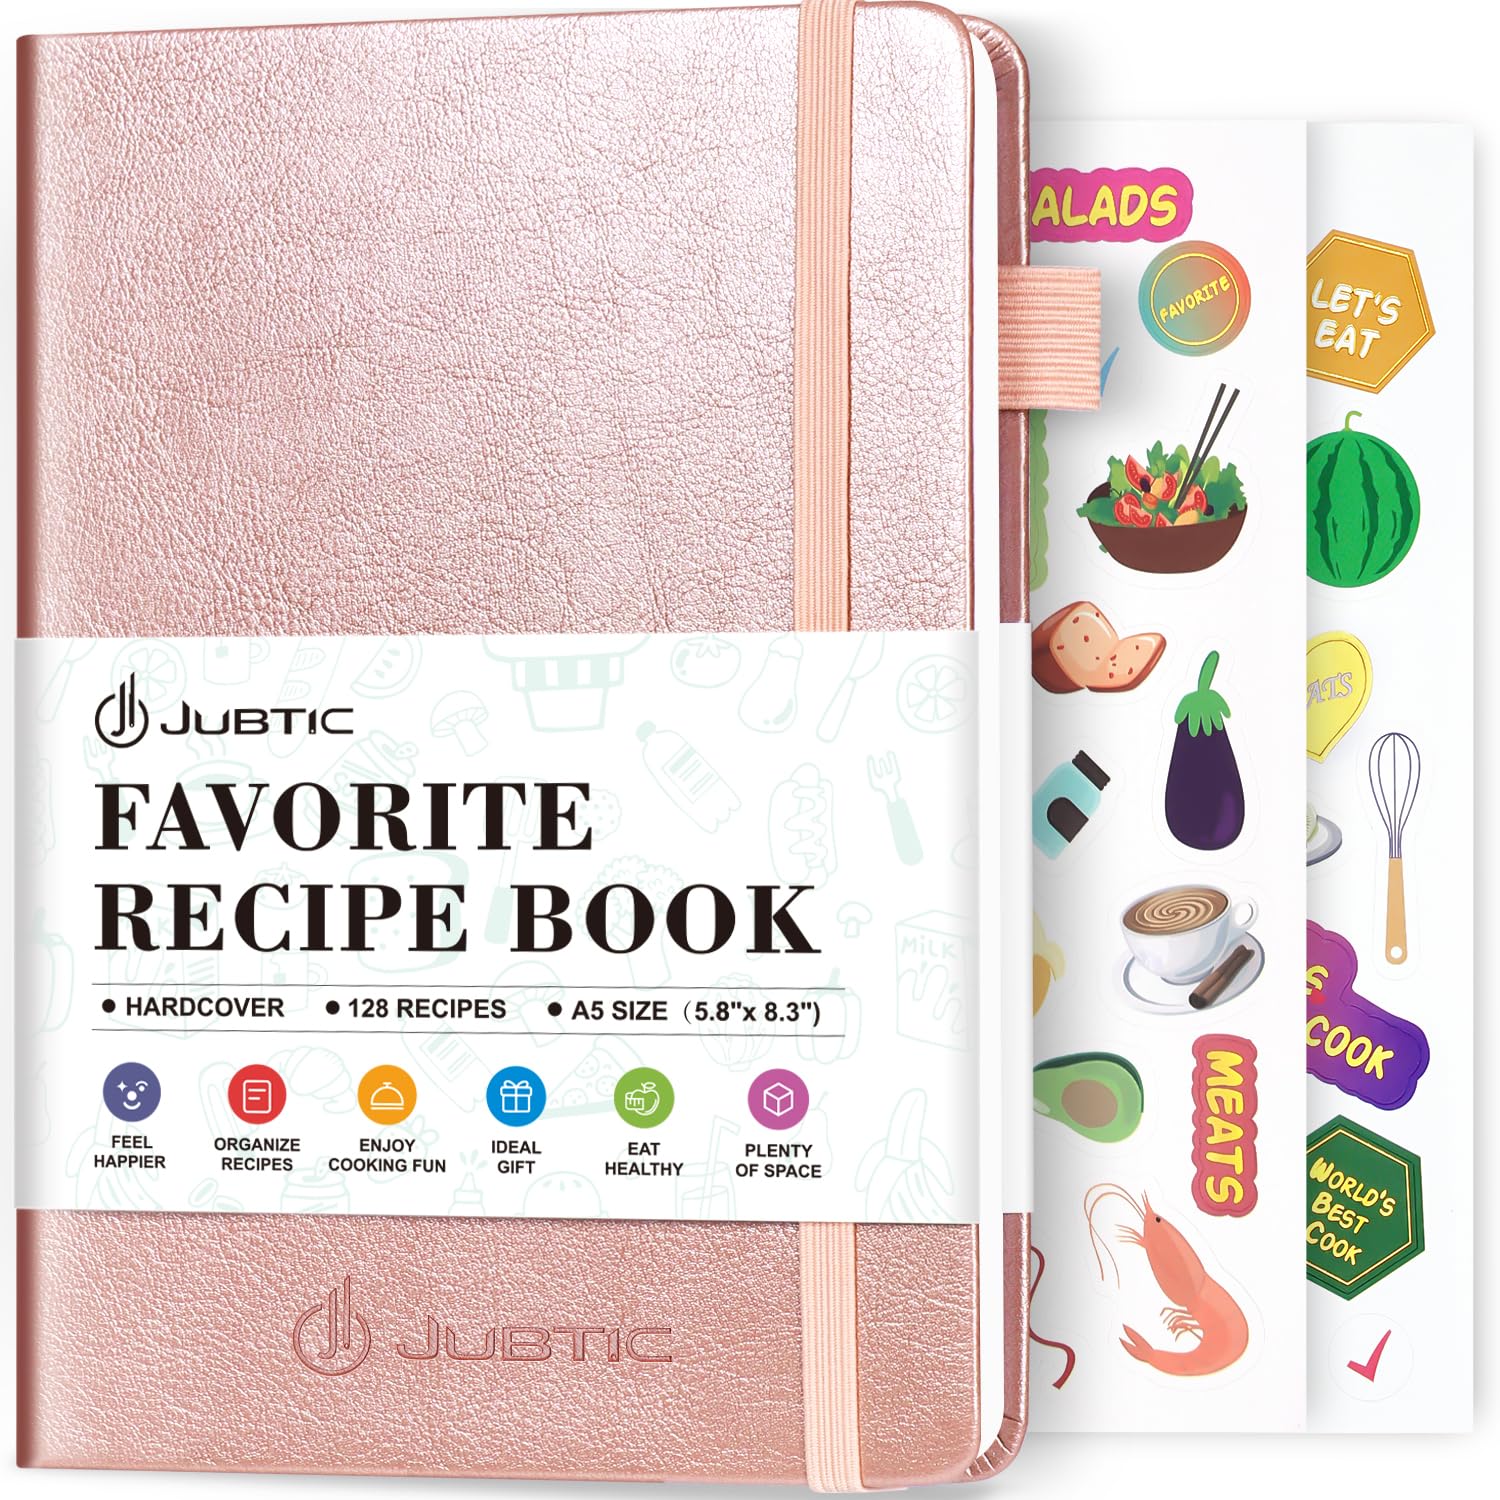 Blank Recipe Book To Write In Your Own Recipes - Family Cook Book Journal  Notebook With Recipe Templates To Create A Personalized Cookbook - Table of